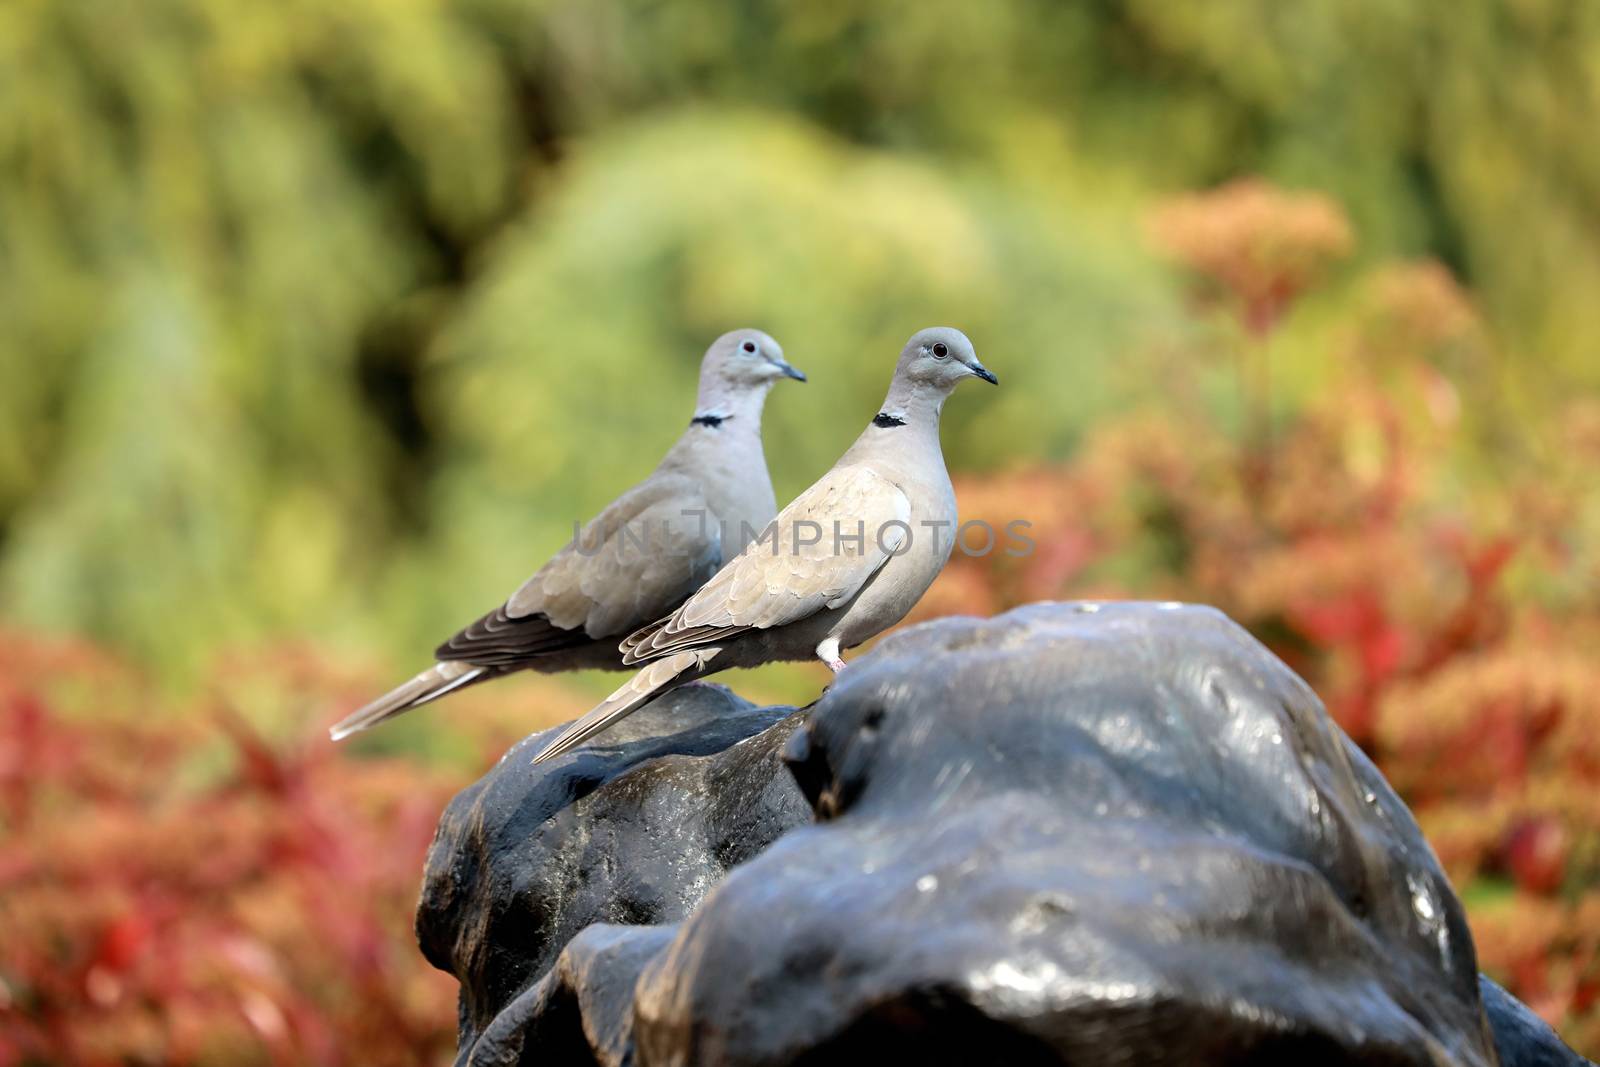 Two Turtledoves Looking in The Same Direction by bensib